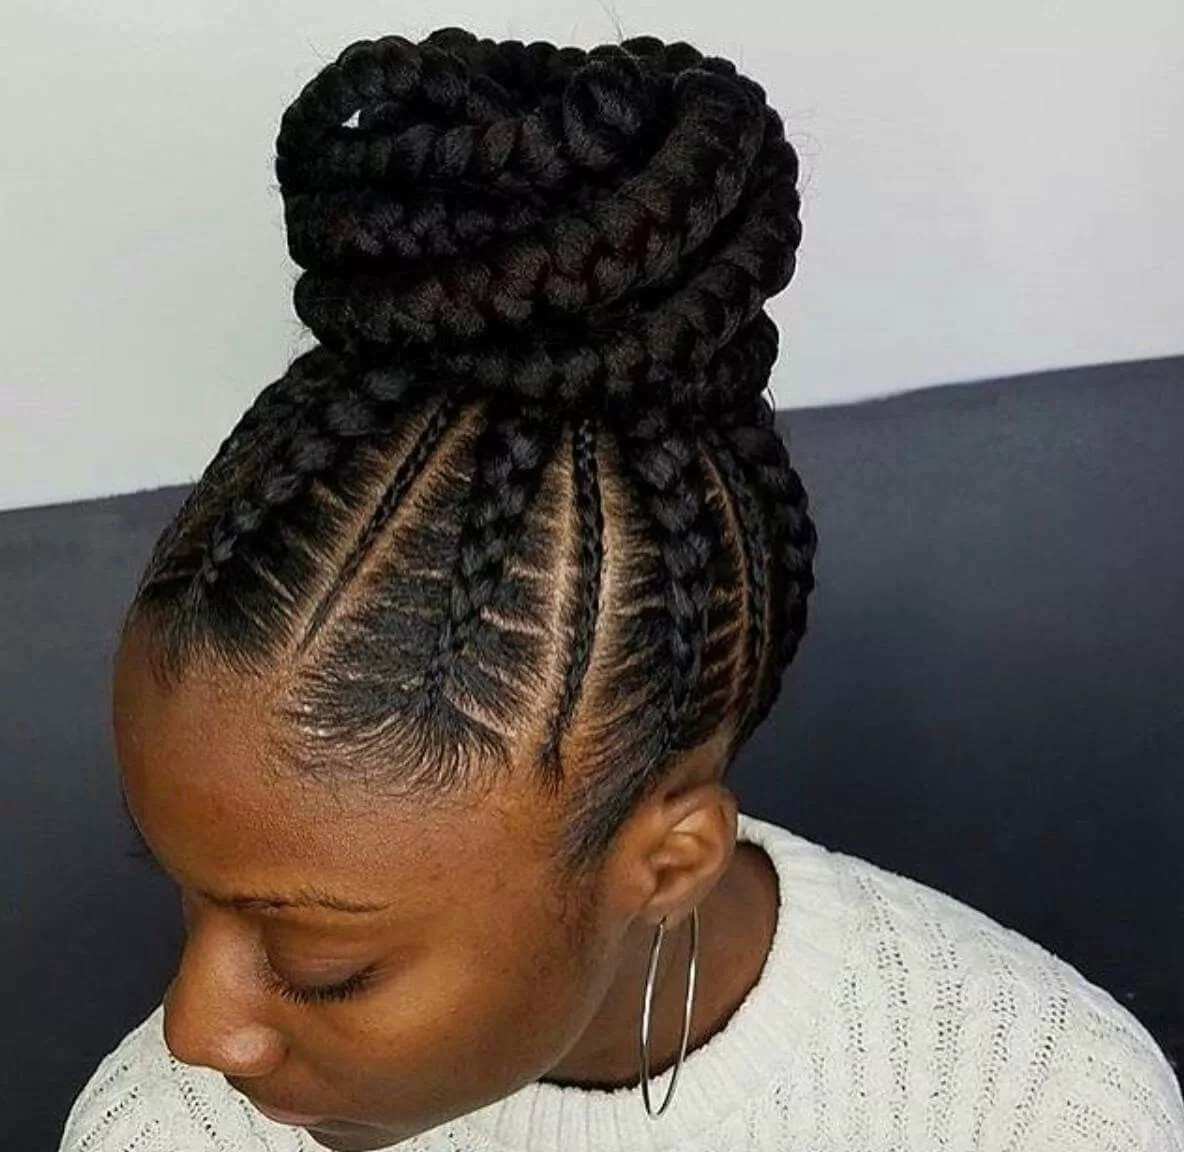 African Braids Hairstyles
 Top 10 African braiding hairstyles for la s PHOTOS